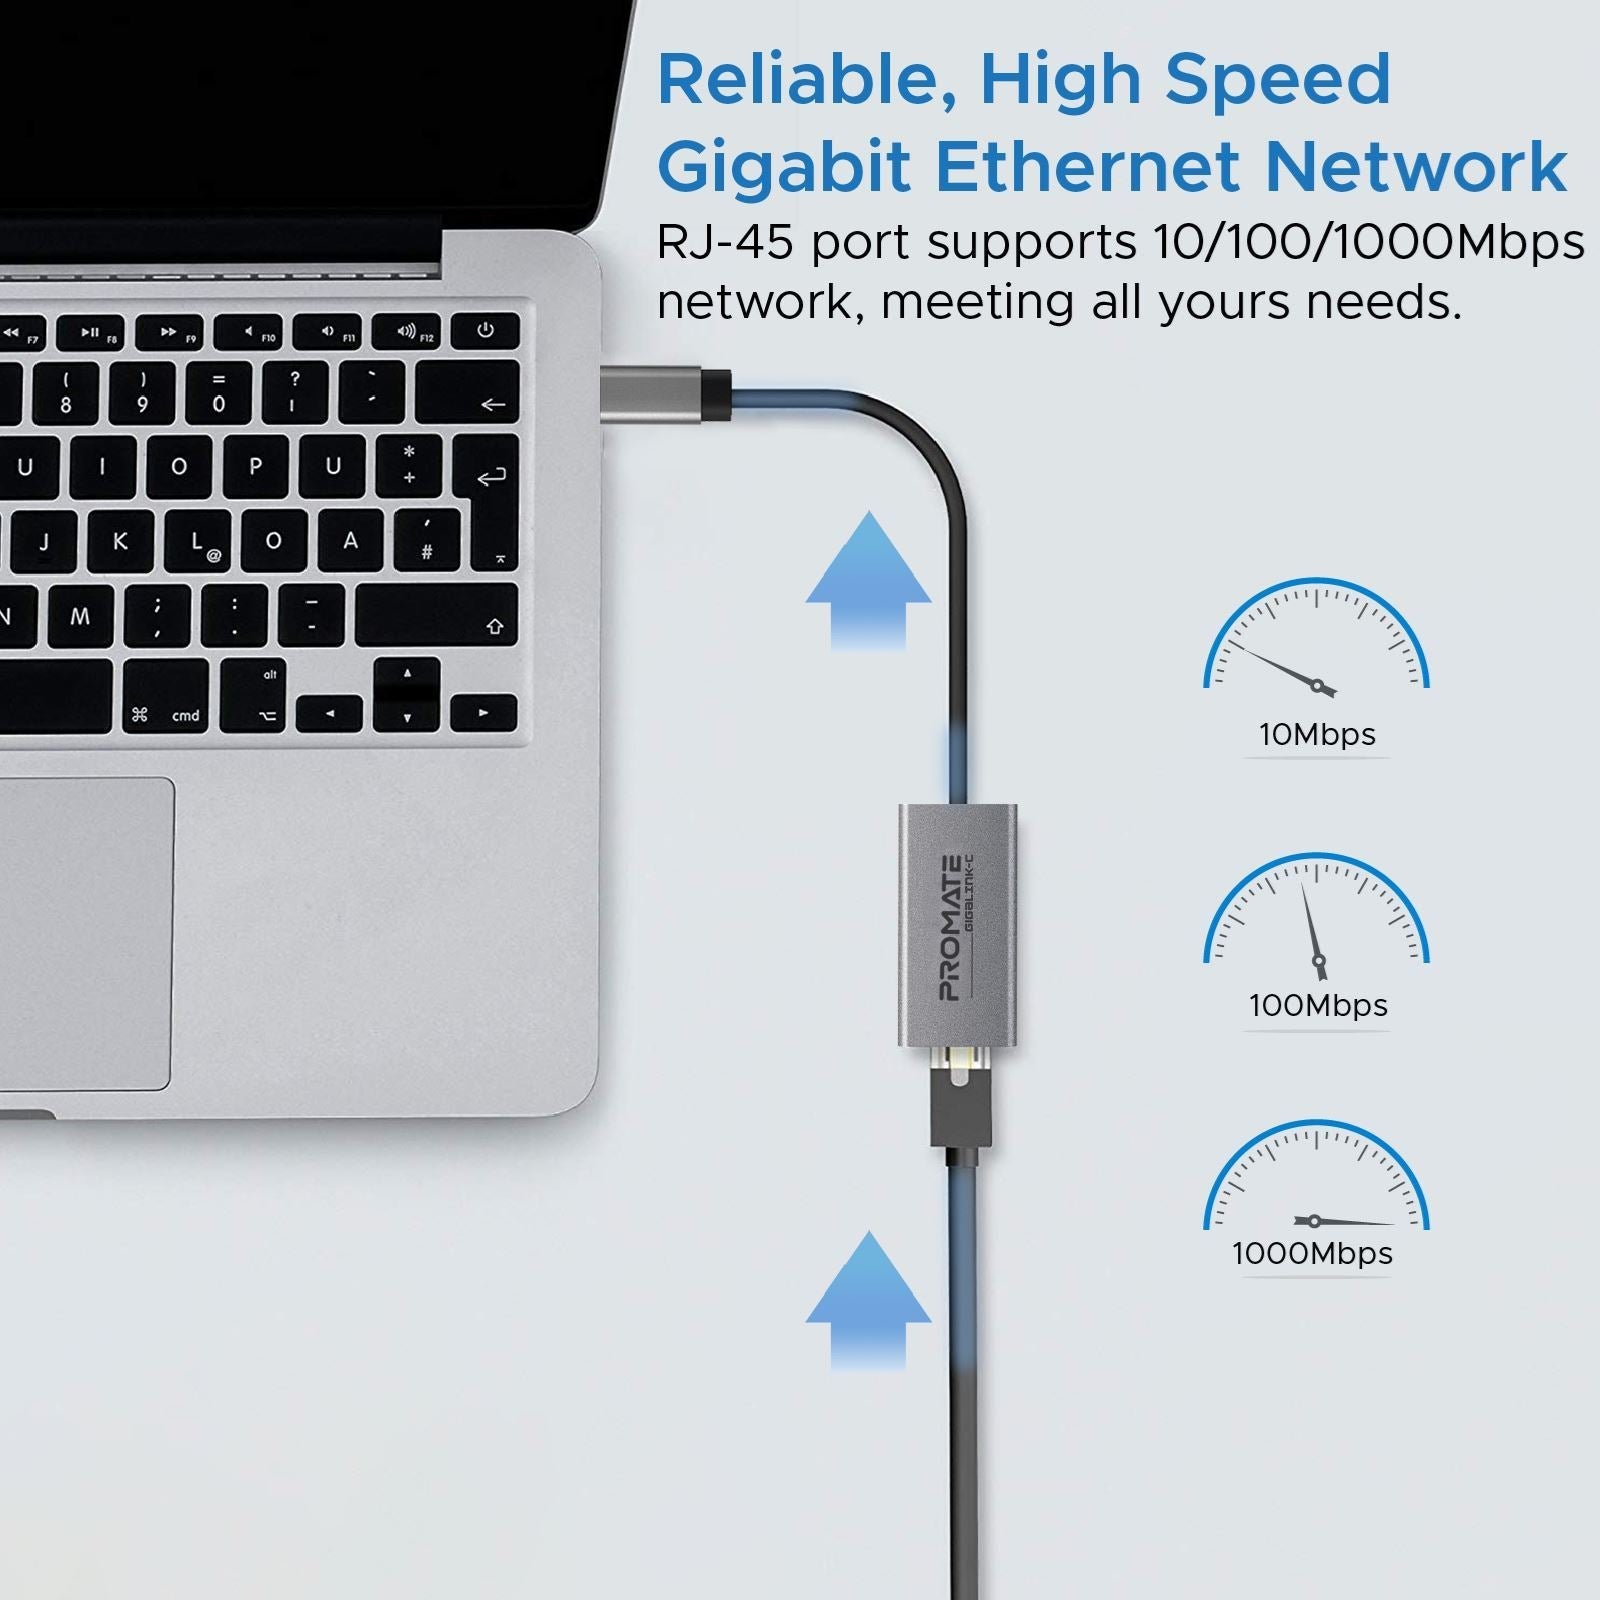 PROMATE_High_Speed_USB-C_to_RJ45_Gigabit_Ethernet_Adapter._Compact_Design,_Premuim_Aluminum_Alloy,_Supports_All_USB-C_Devices_such_as_Laptops,_Tablets,_&_Mobiles._Plug_&_Play._Grey_Colour. 1318